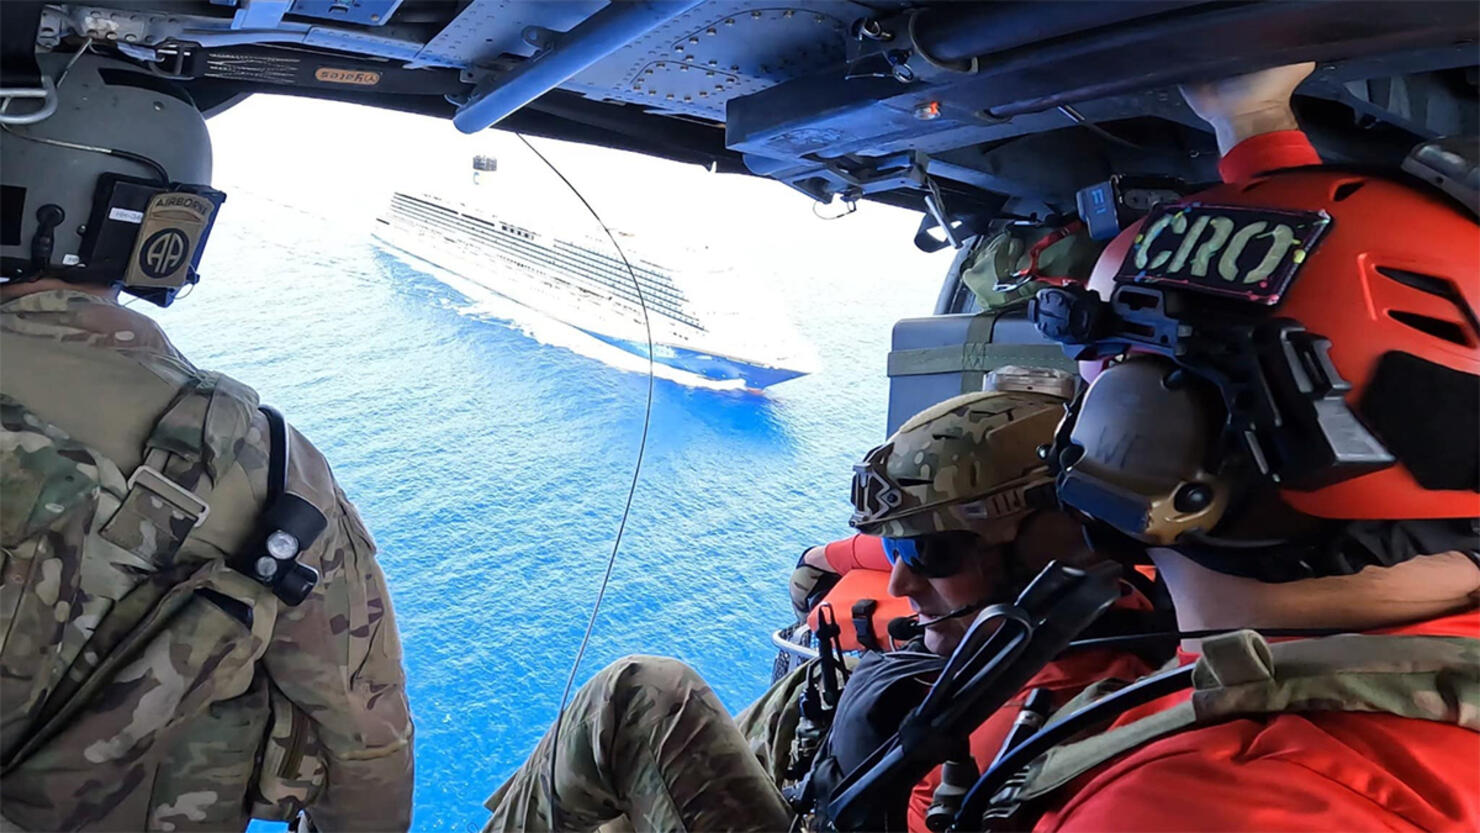 Members of the 920th Rescue Wing preparing to rescue a sick a cruise ship passenger.